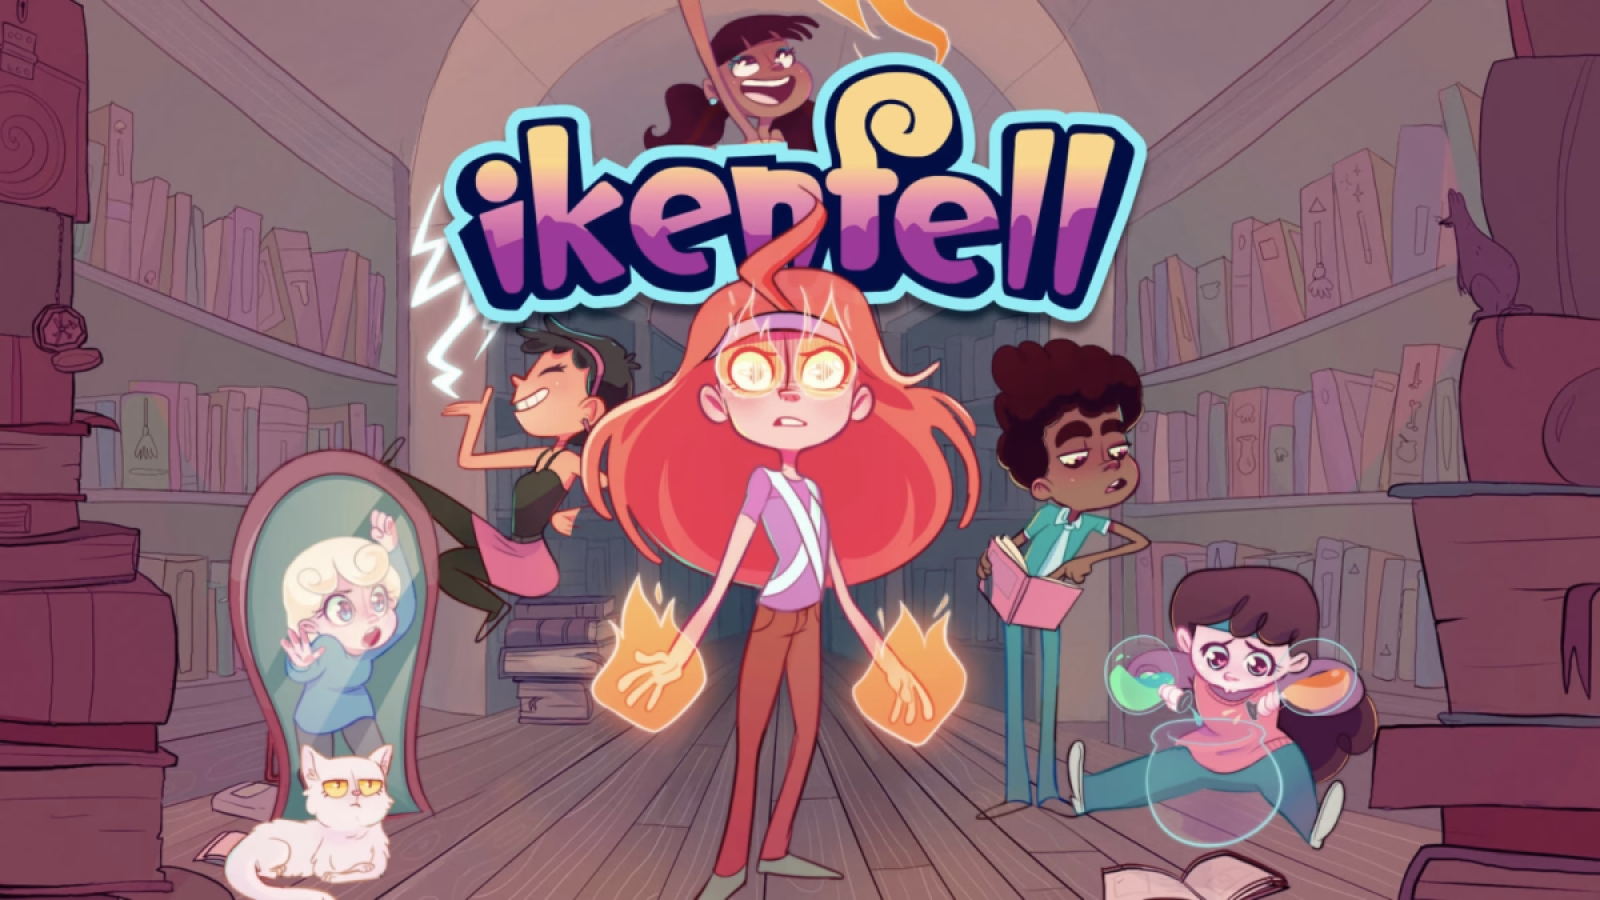 Ikenfell's characters in cover art